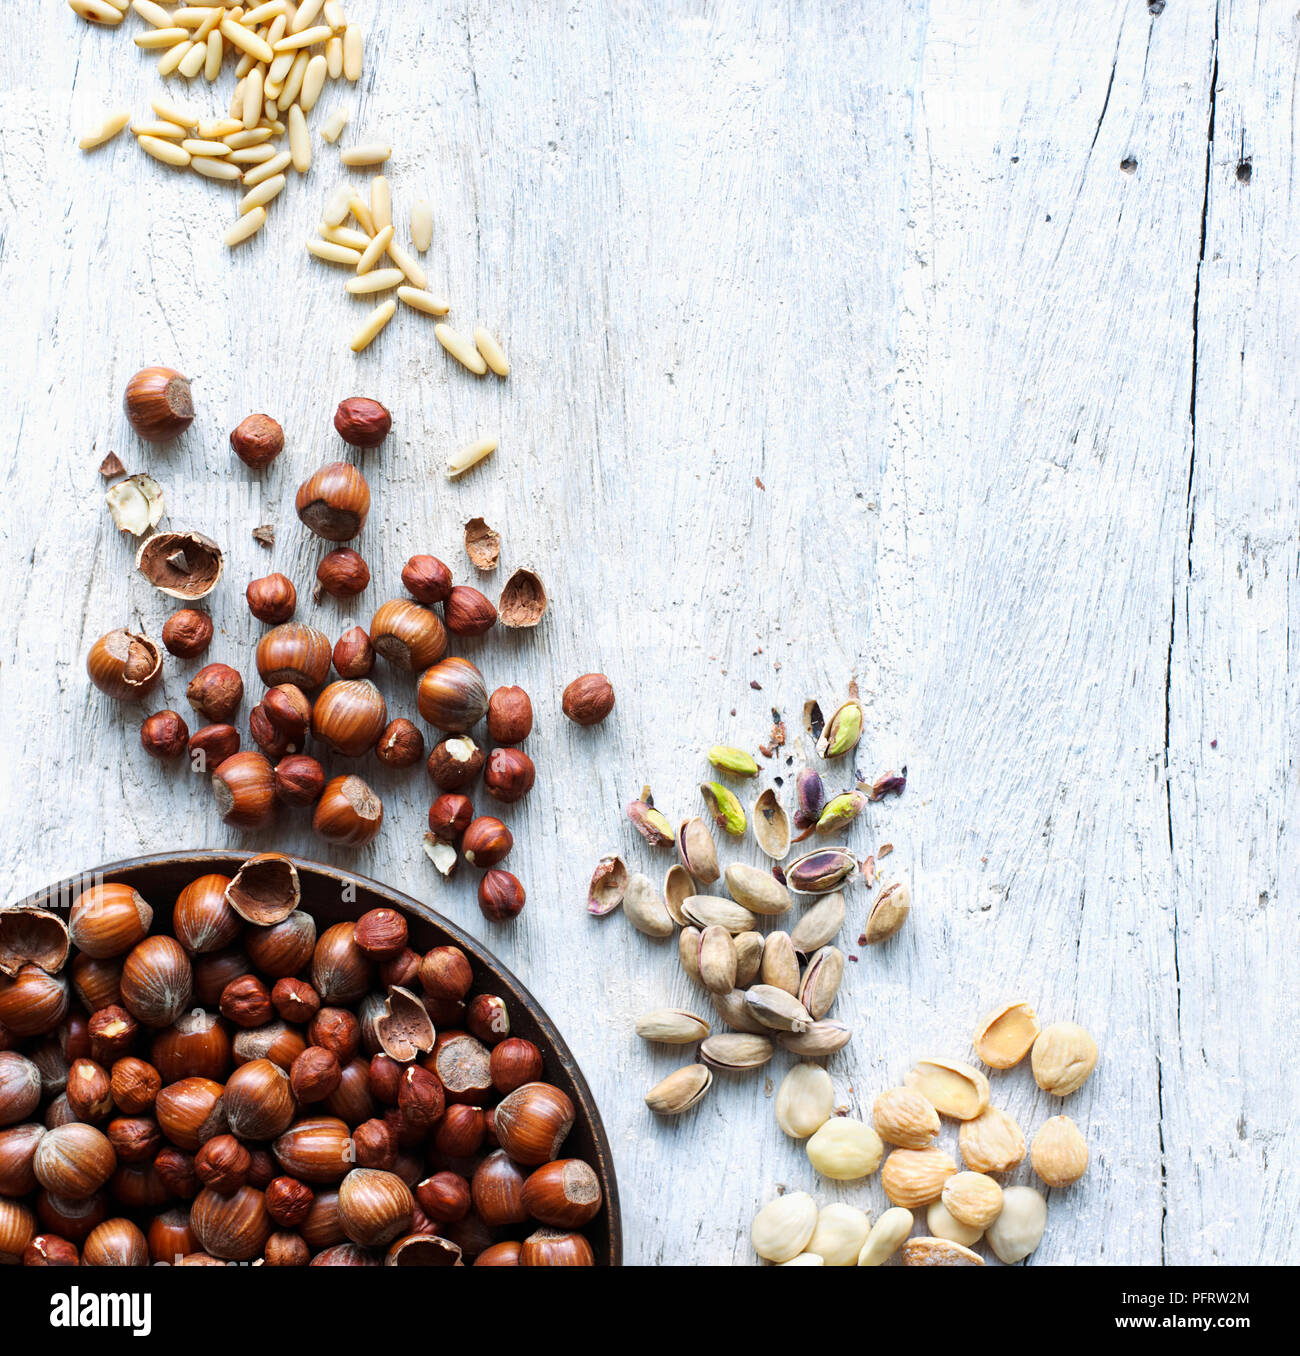 A selection of nuts on wood background Stock Photo